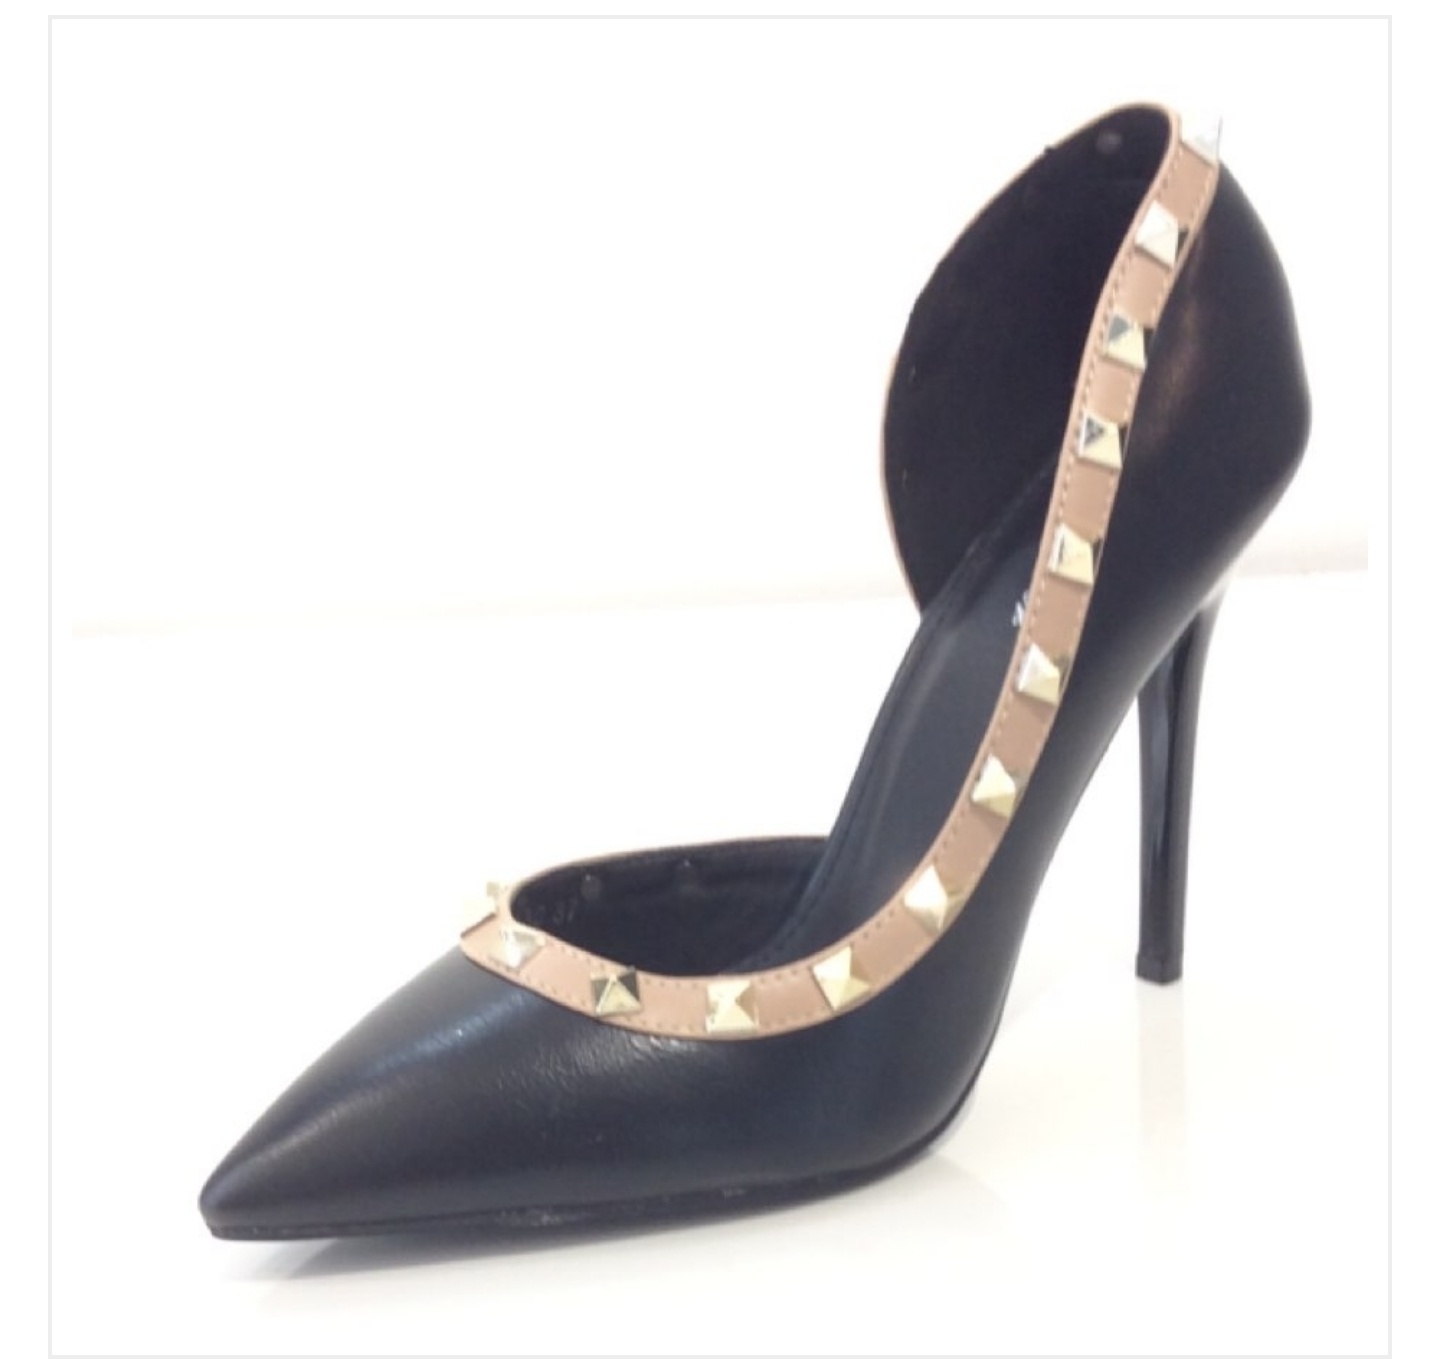 Stilettos shoes high heels - black stilettos with gold studs shoes YQWVYAY